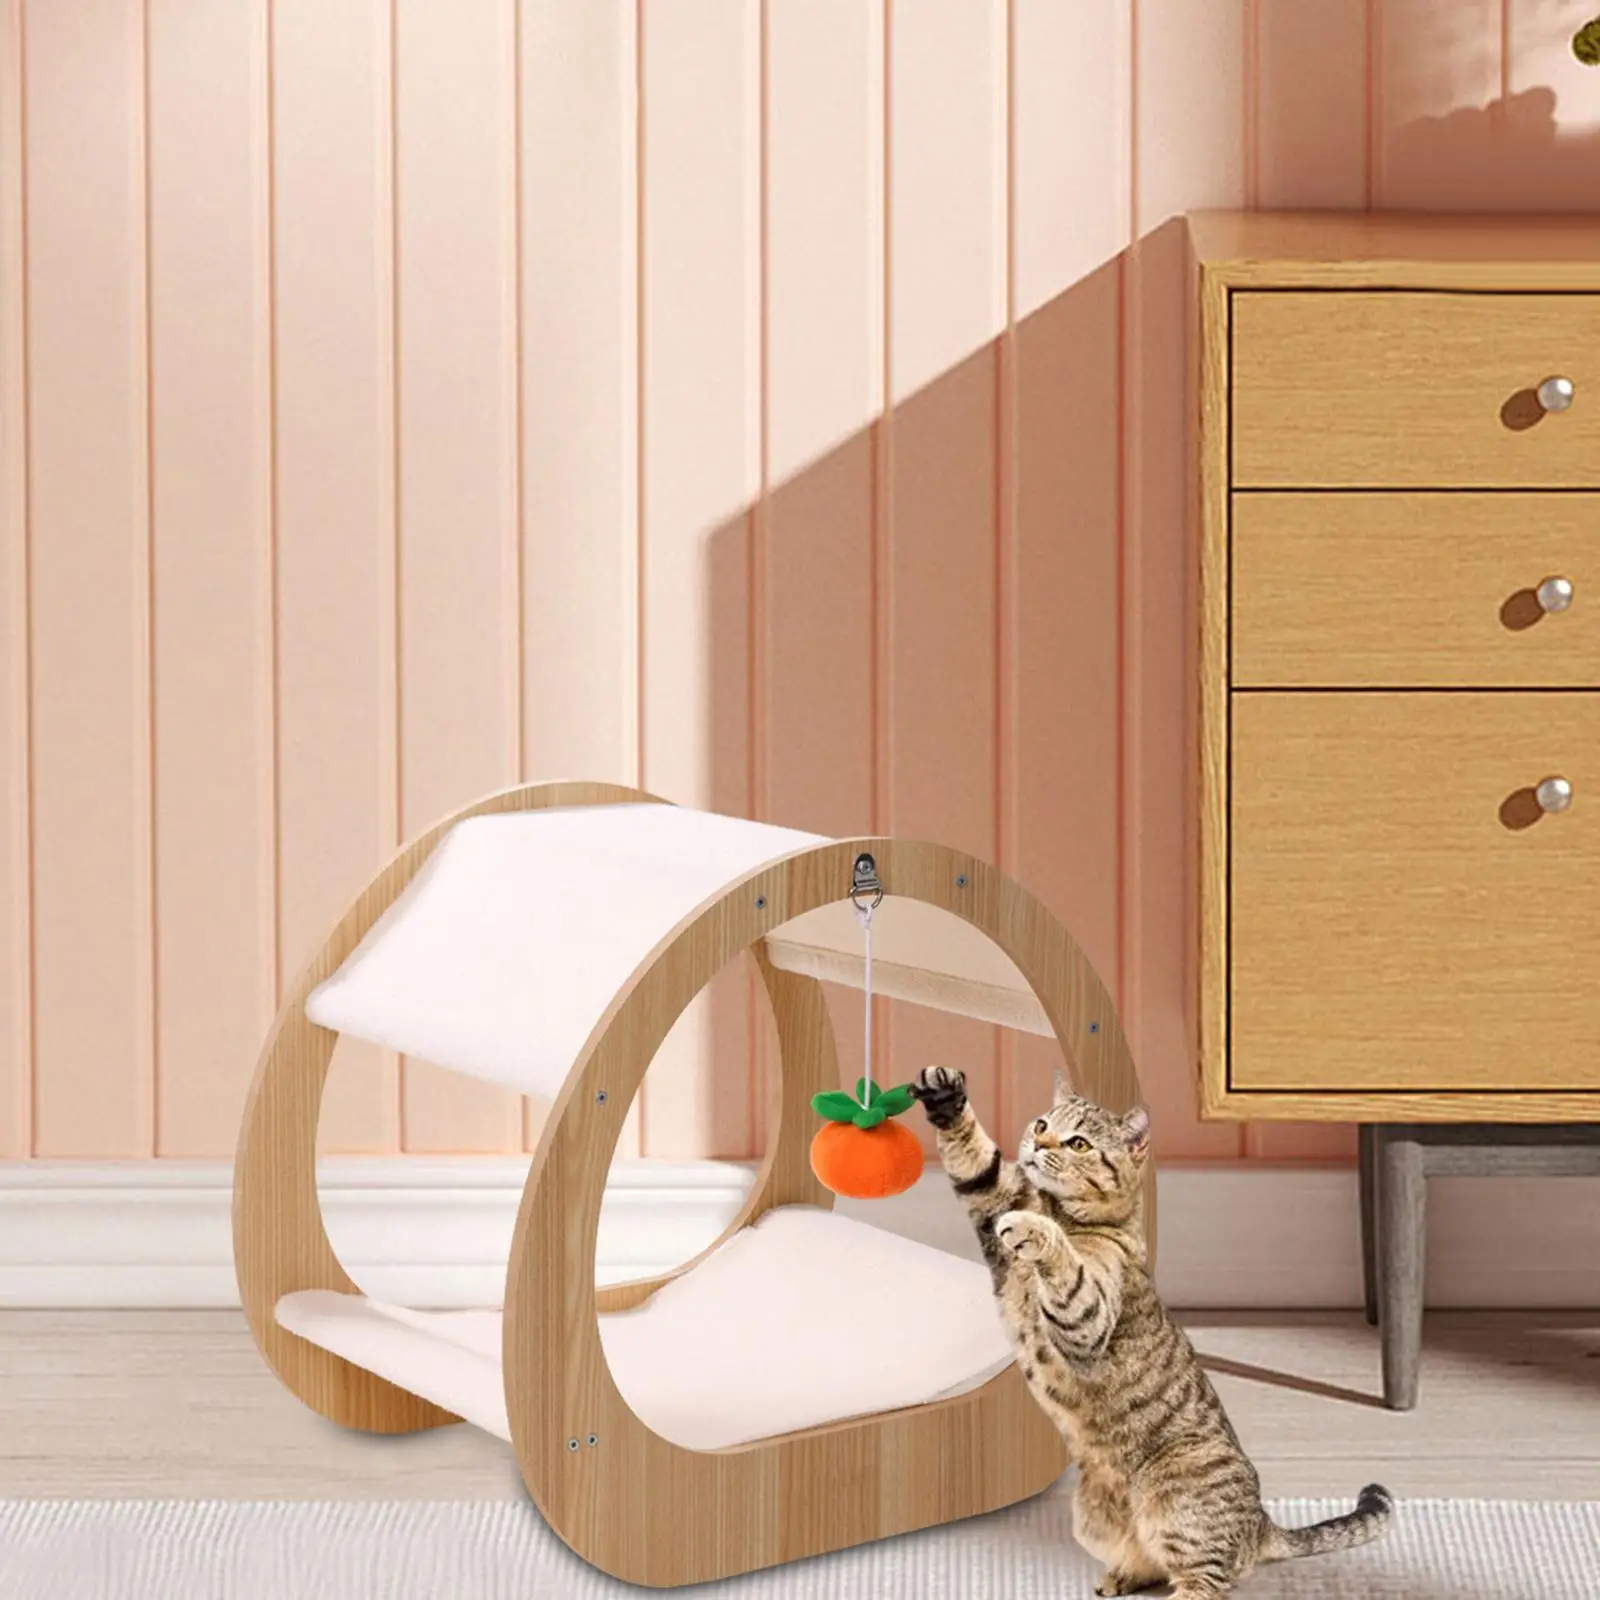 Cat Scratch Post Playing Platform Resting Cat Furniture Multifunction Cat House for Indoor Cats Kitten Rabbit Large Cats